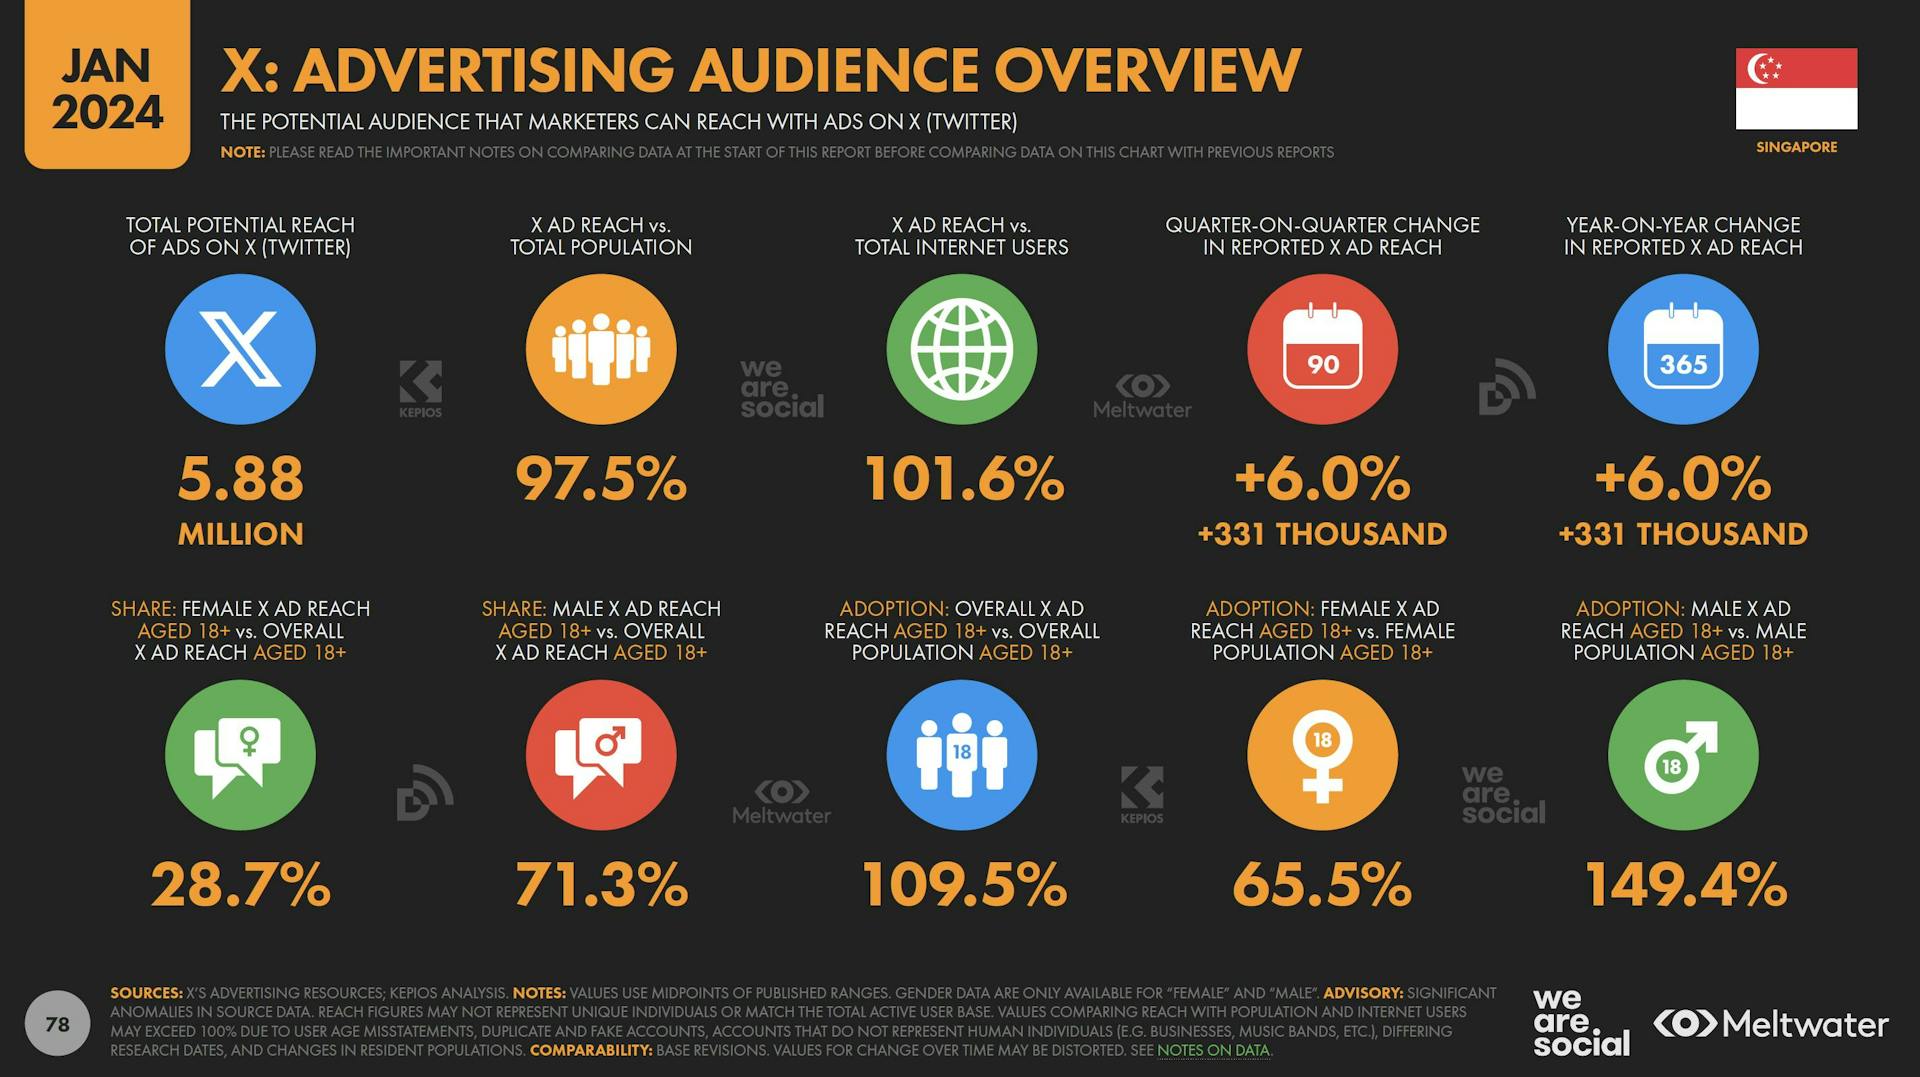 X advertising audience overview based on Global Digital Report 2024 for Singapore